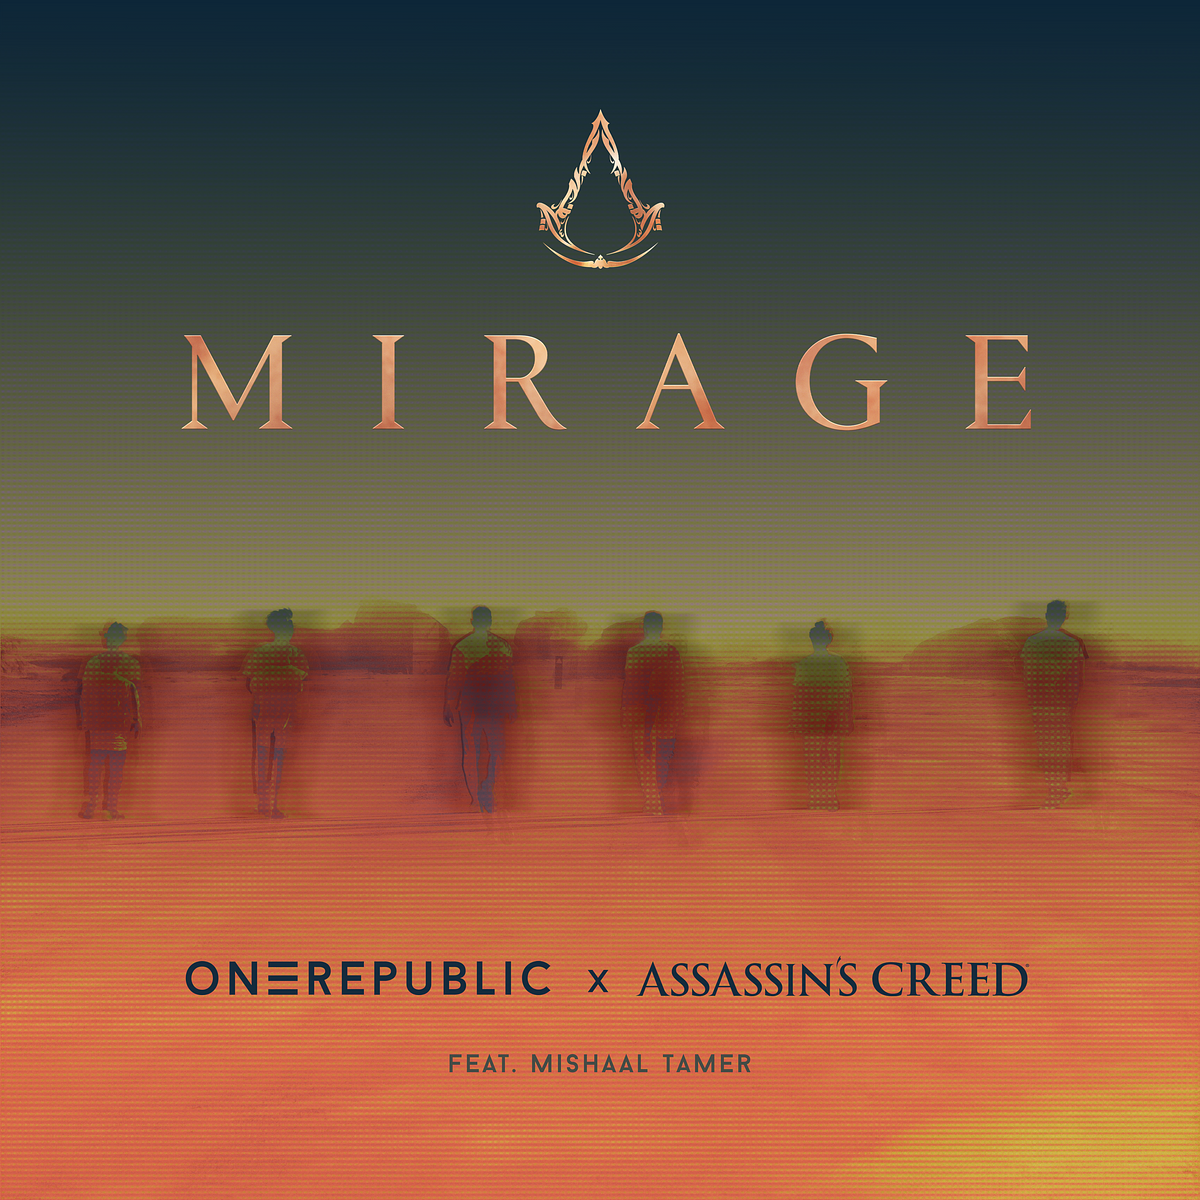 Ubisoft and One Republic Collaborate on Assassin's Creed Mirage Soundtrack